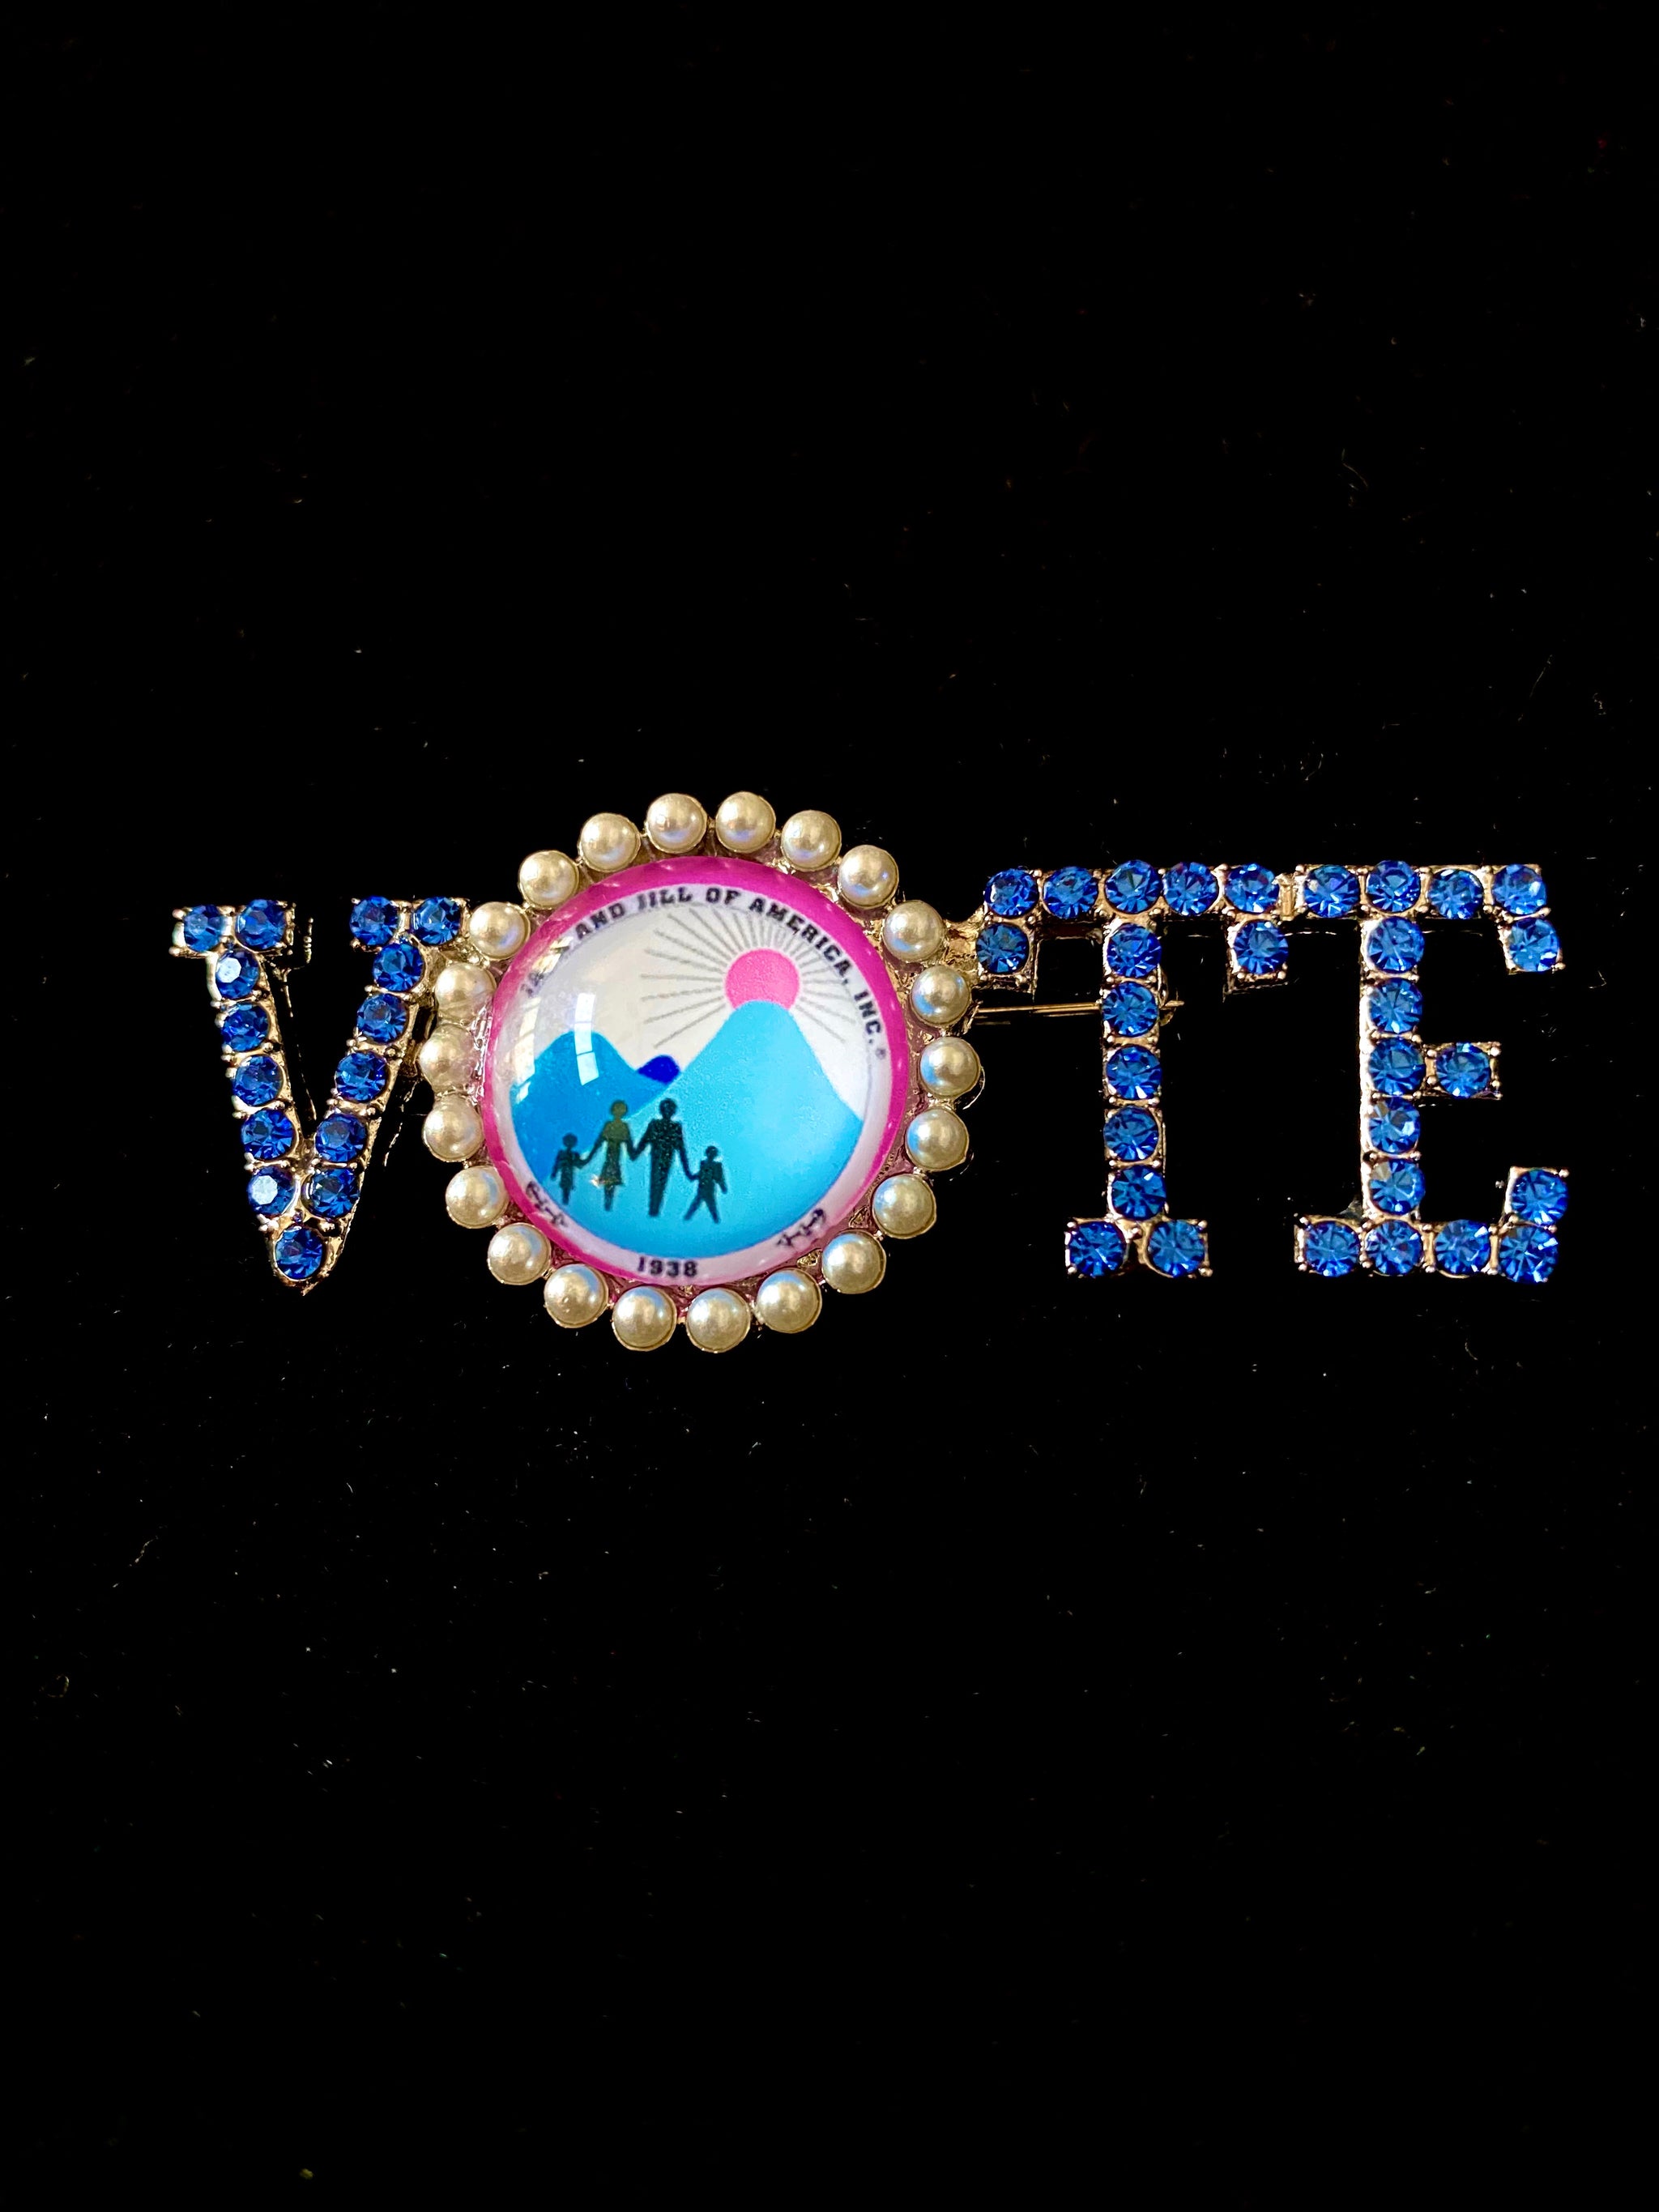 Jack Jill Vote Pin Beautiful Things Greeks Company Exclusively For Greeks